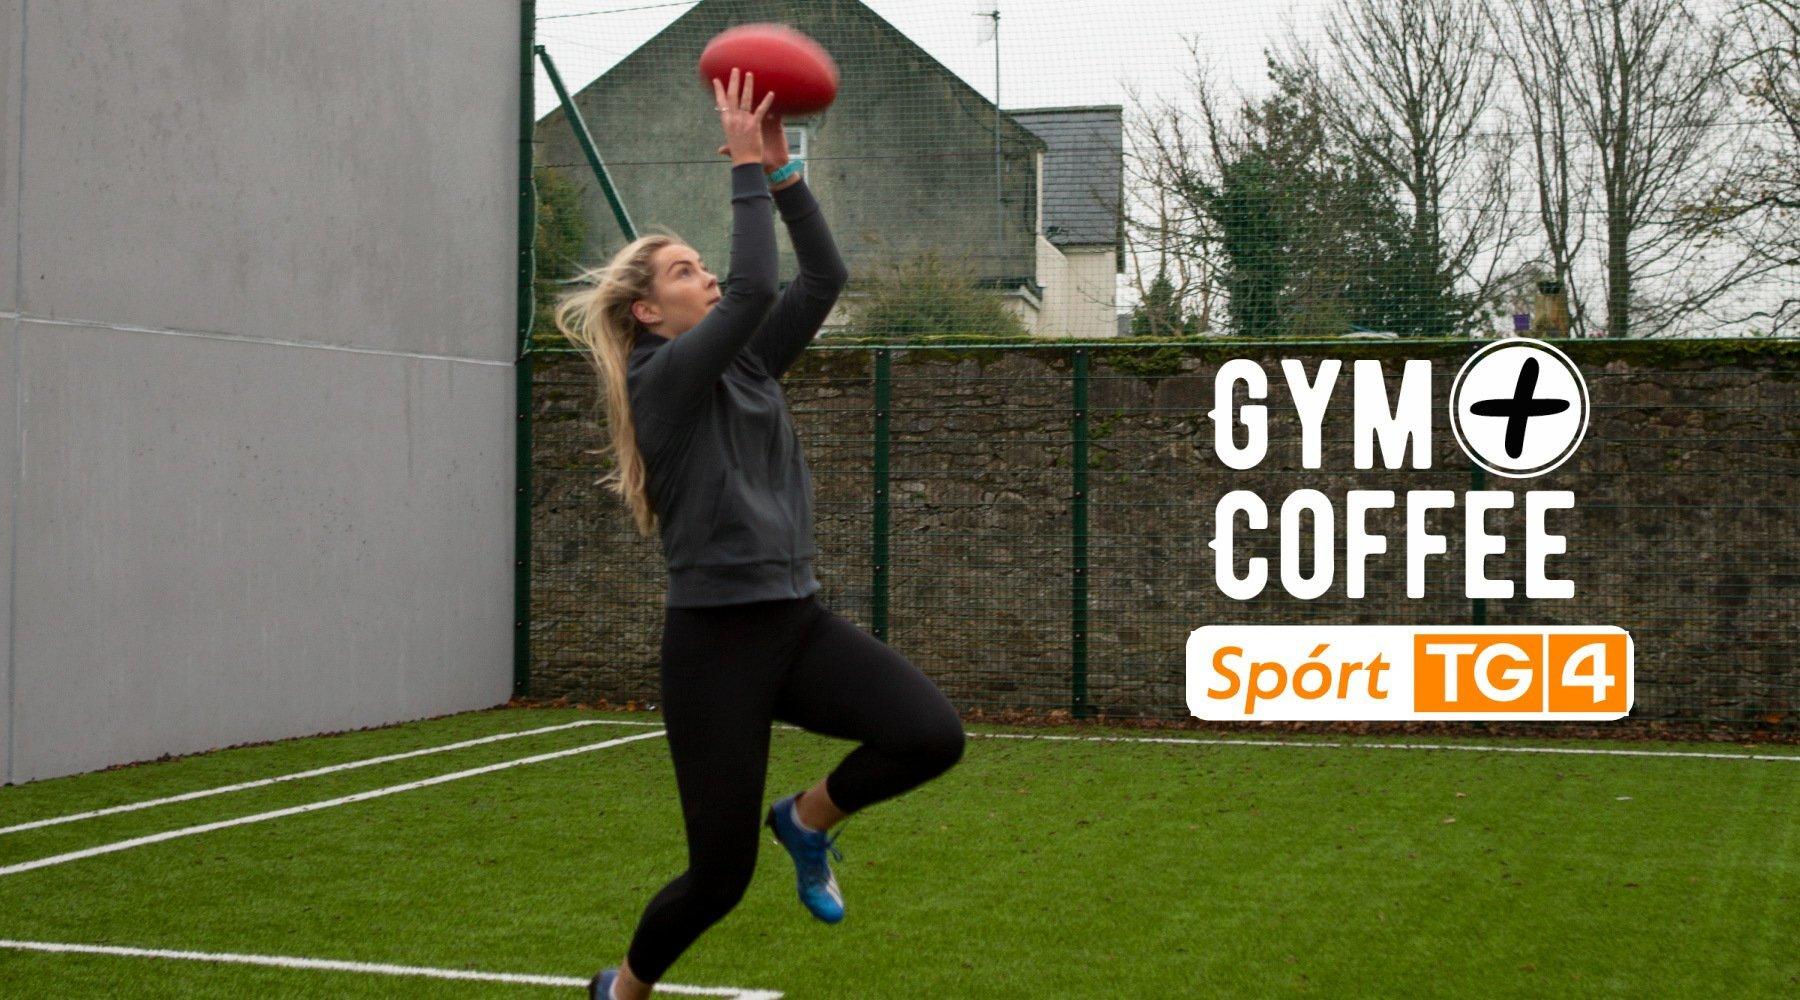 WE'RE SPONSORING THE AFLW ON TG4! - Gym+Coffee